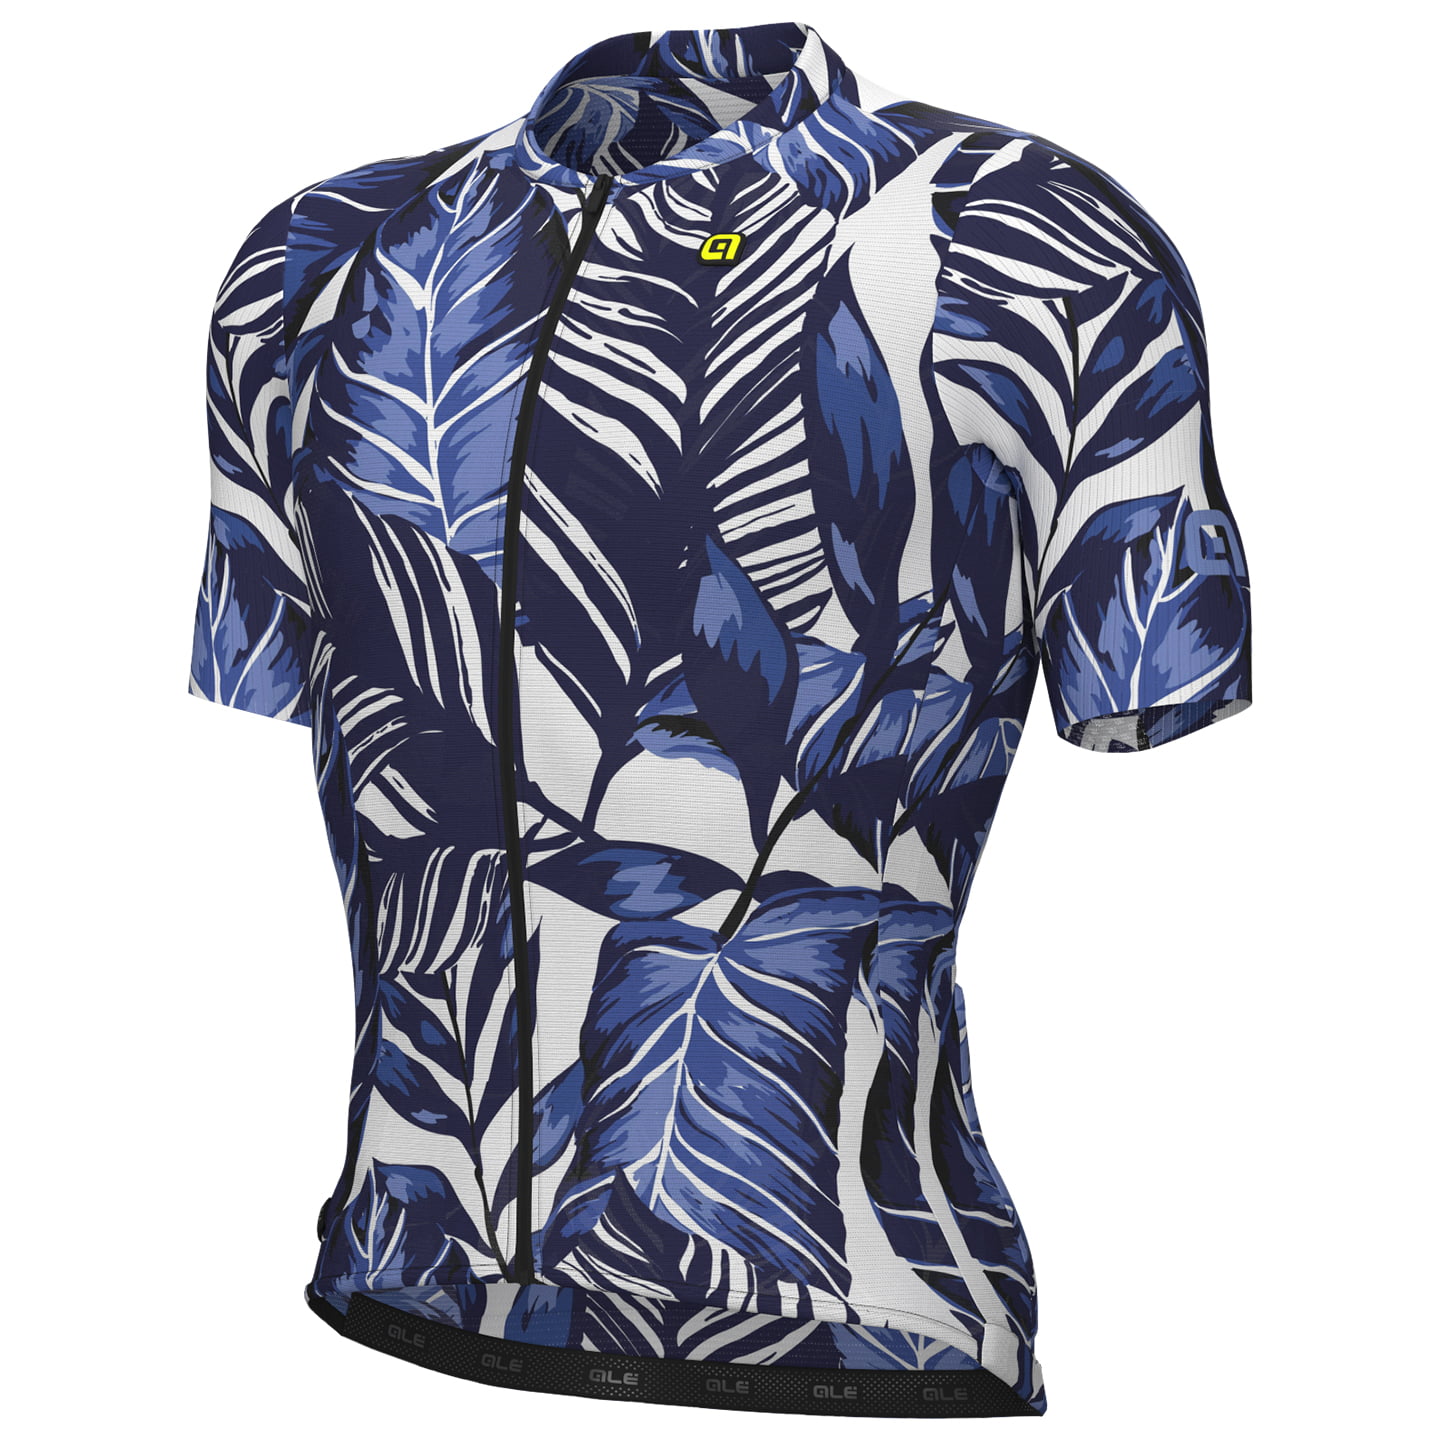 ALE Wild Short Sleeve Jersey Short Sleeve Jersey, for men, size XL, Cycling jersey, Cycle clothing